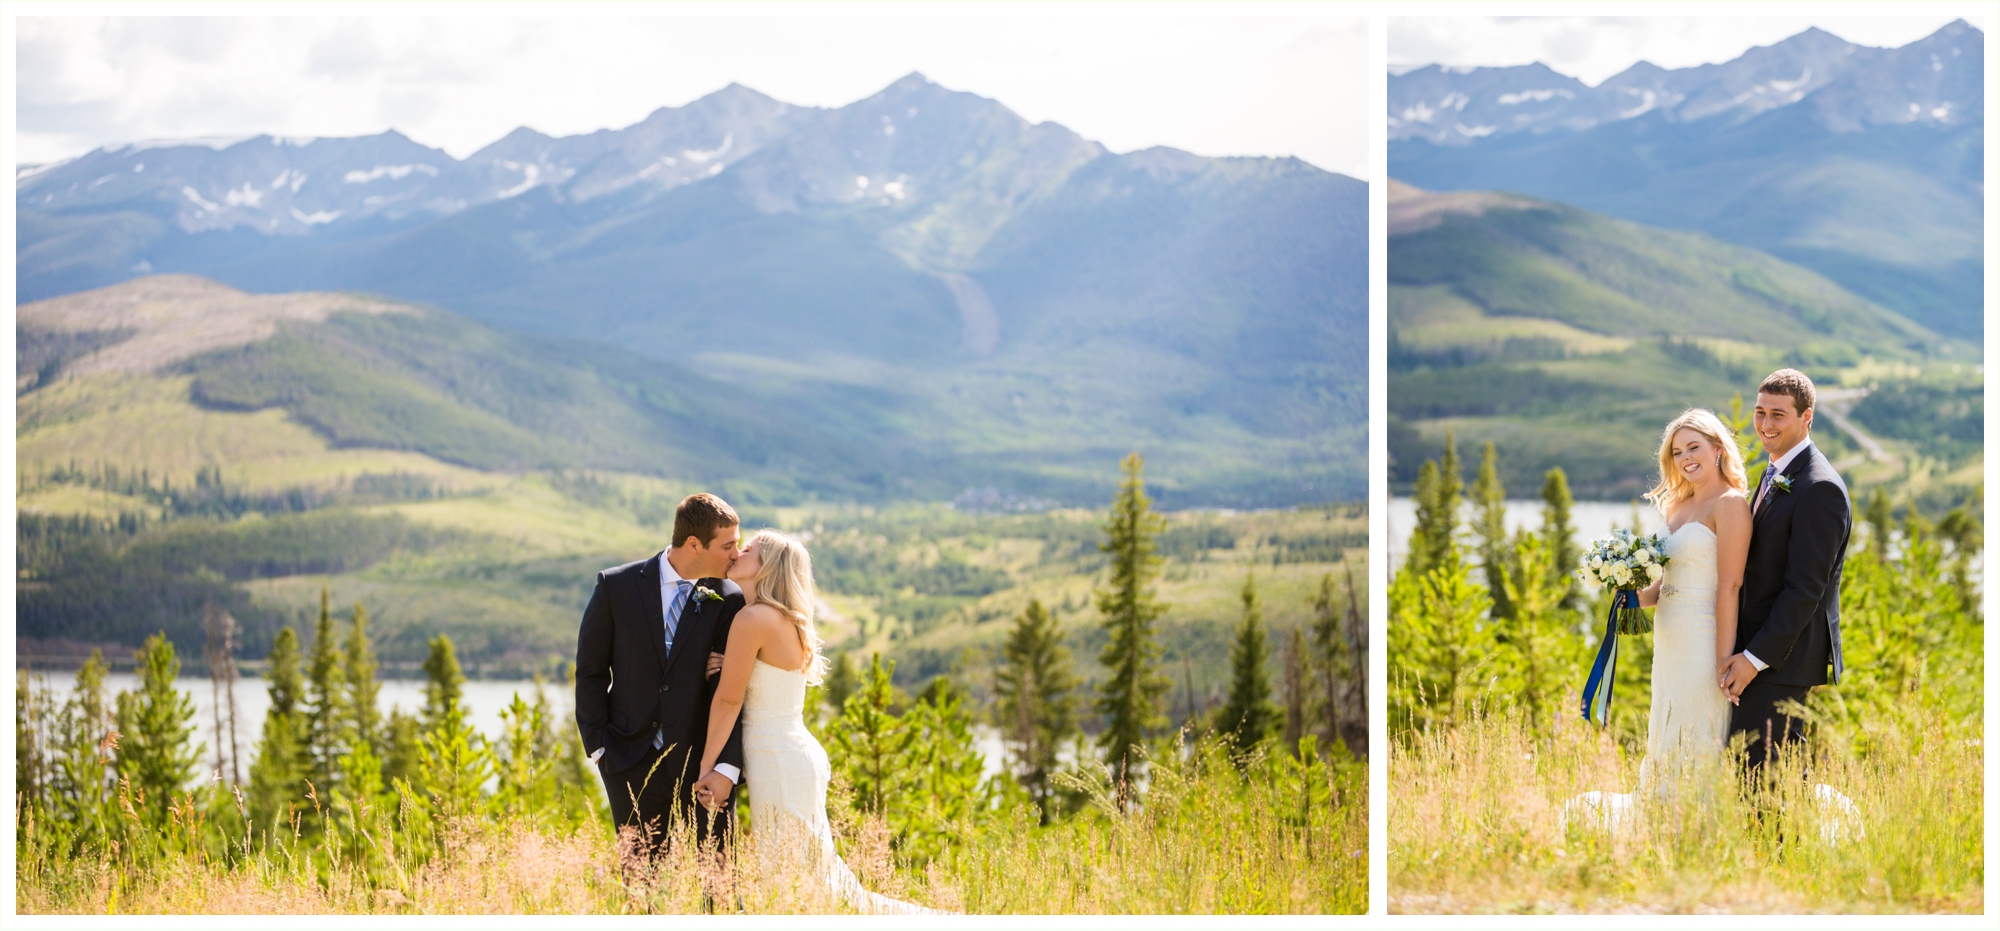 bride and groom candid natural wedding portraits at sapphire point overlook lake dillon colorado